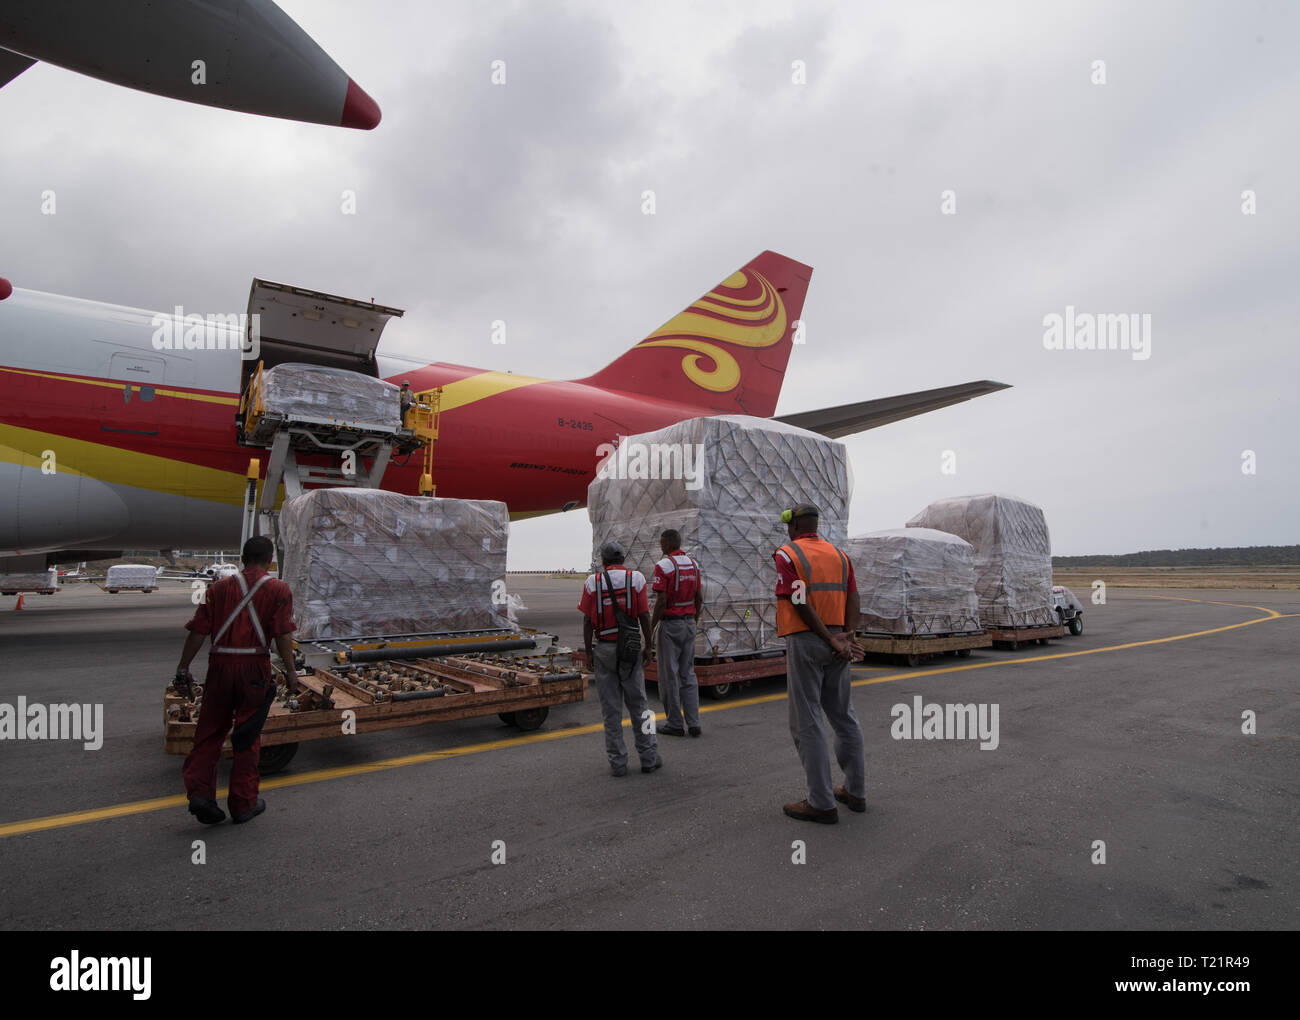 (190330) -- CARACAS, March 30, 2019 (Xinhua) -- Chinese aids are unloaded from the plane at the Simon Bolivar International Airport in Maiquetia in the state of Vargas, Venezuela, on March 29, 2019. The Venezuelan government received on Friday medical aid from China. (Xinhua/Marcos Salgado) Stock Photo